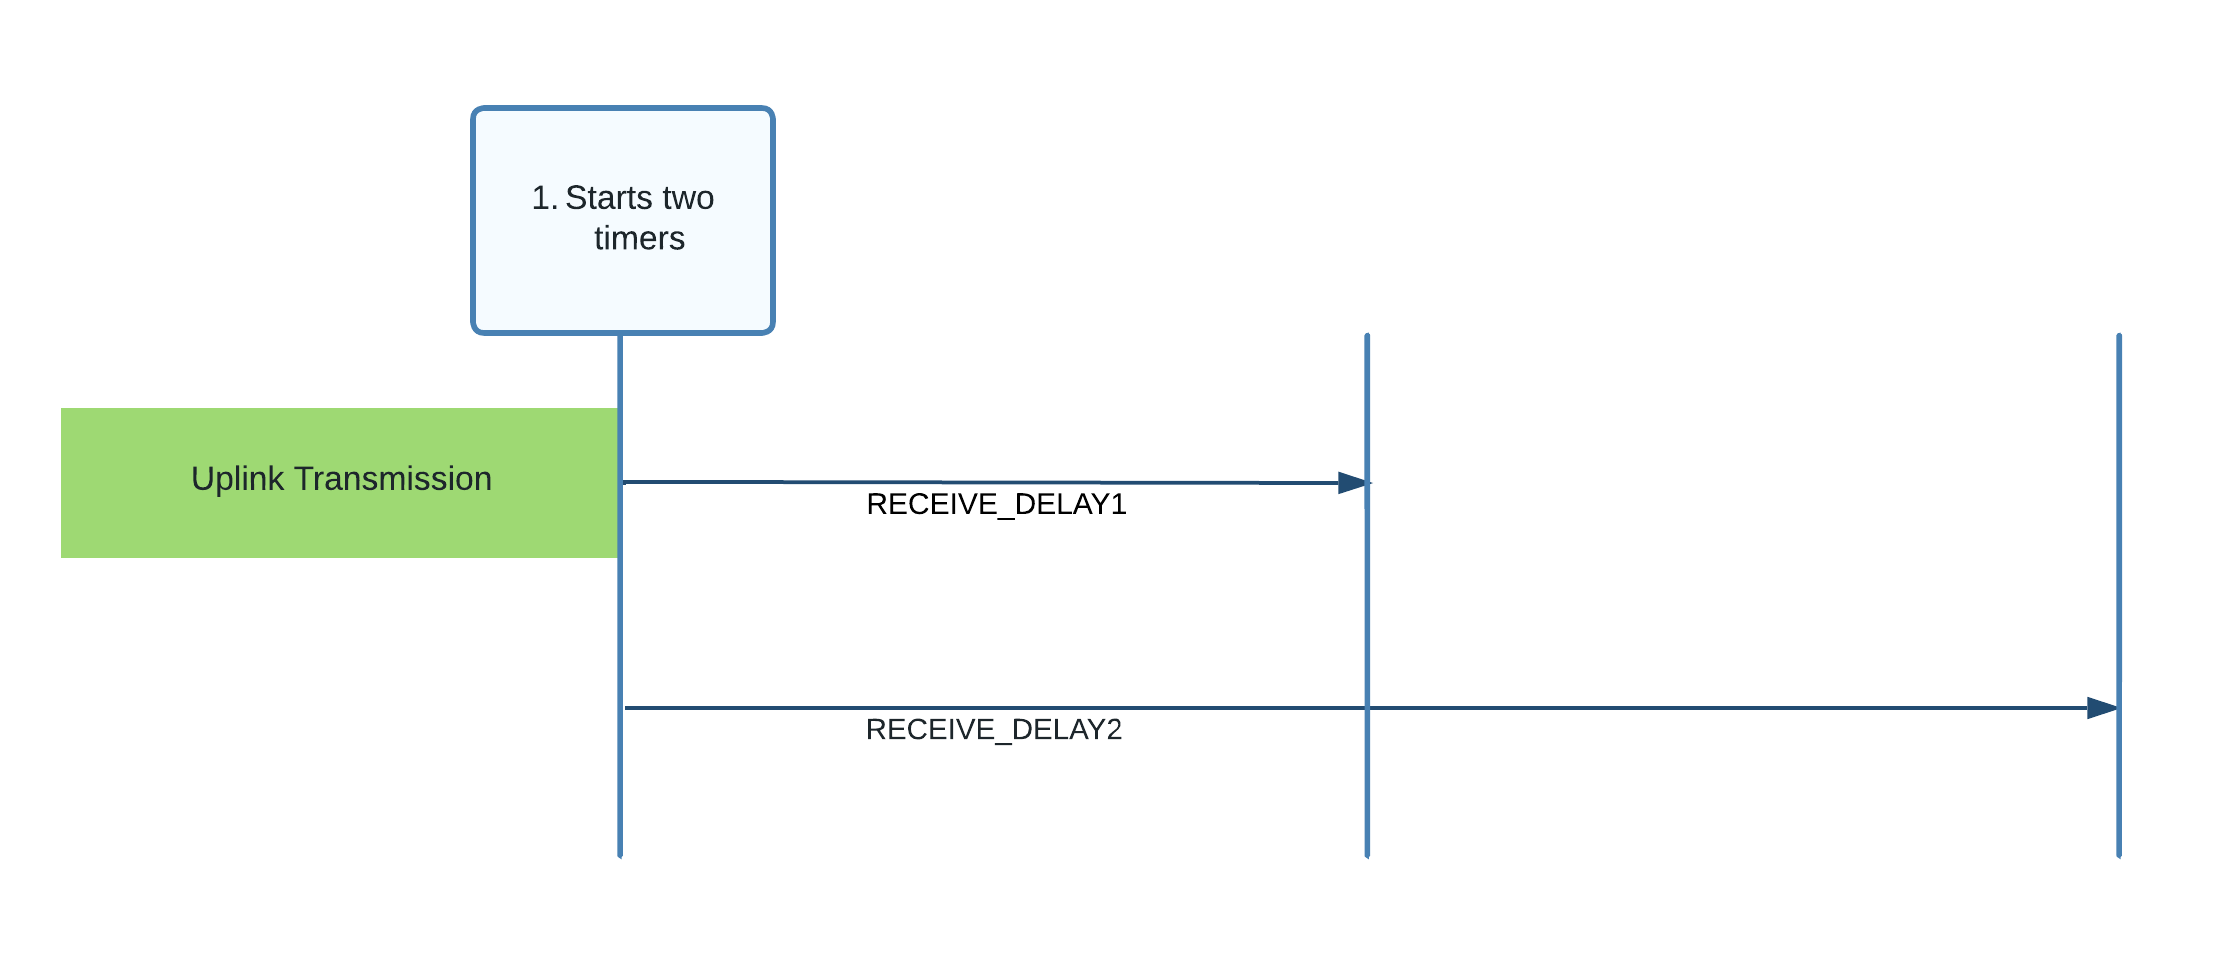 RECEIVE_DELAY1 and RECEIVE_DELAY2 started following uplink transmission